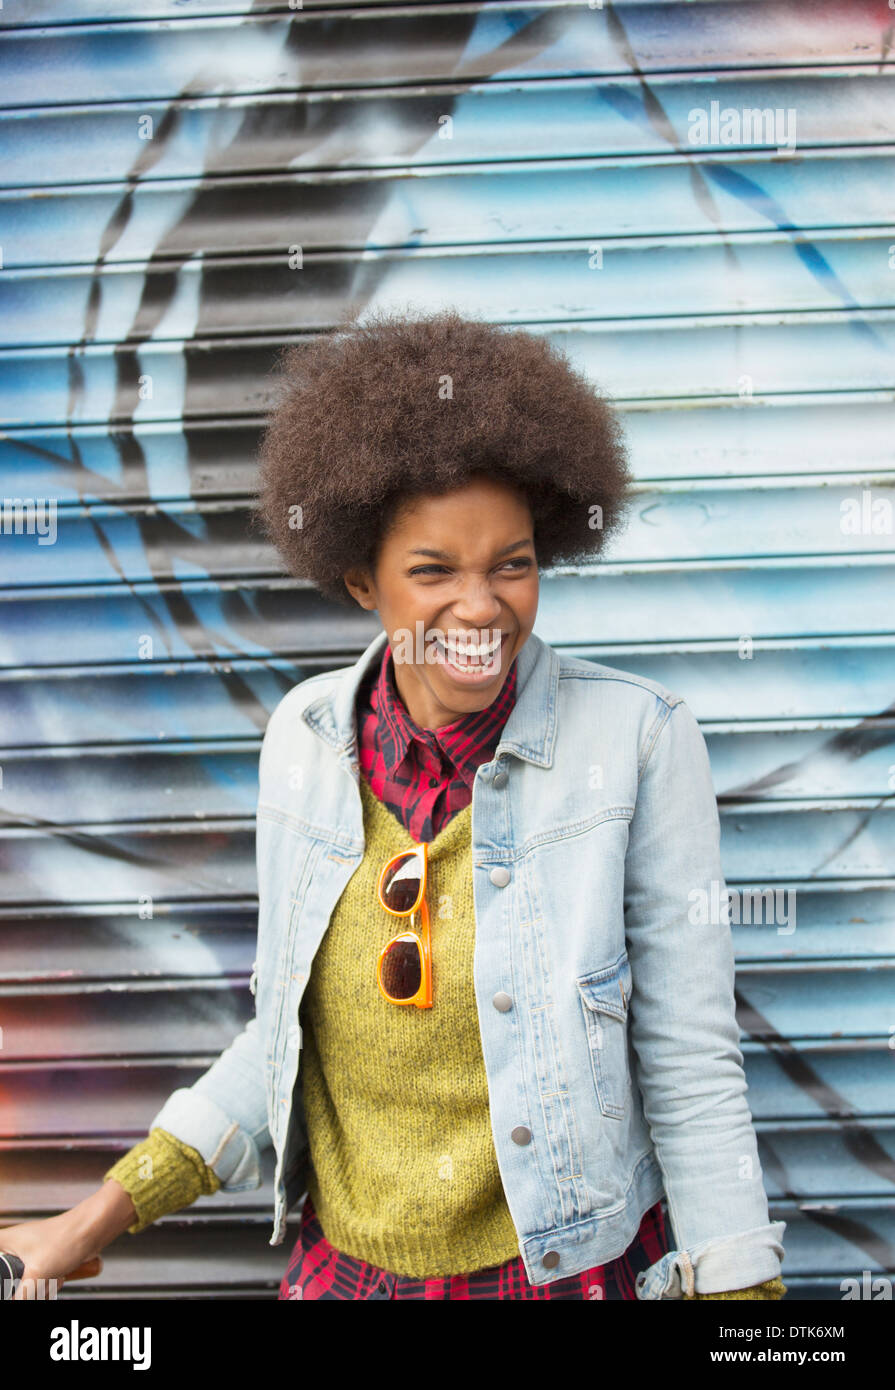 Woman laughing in front of graffiti wall Stock Photo